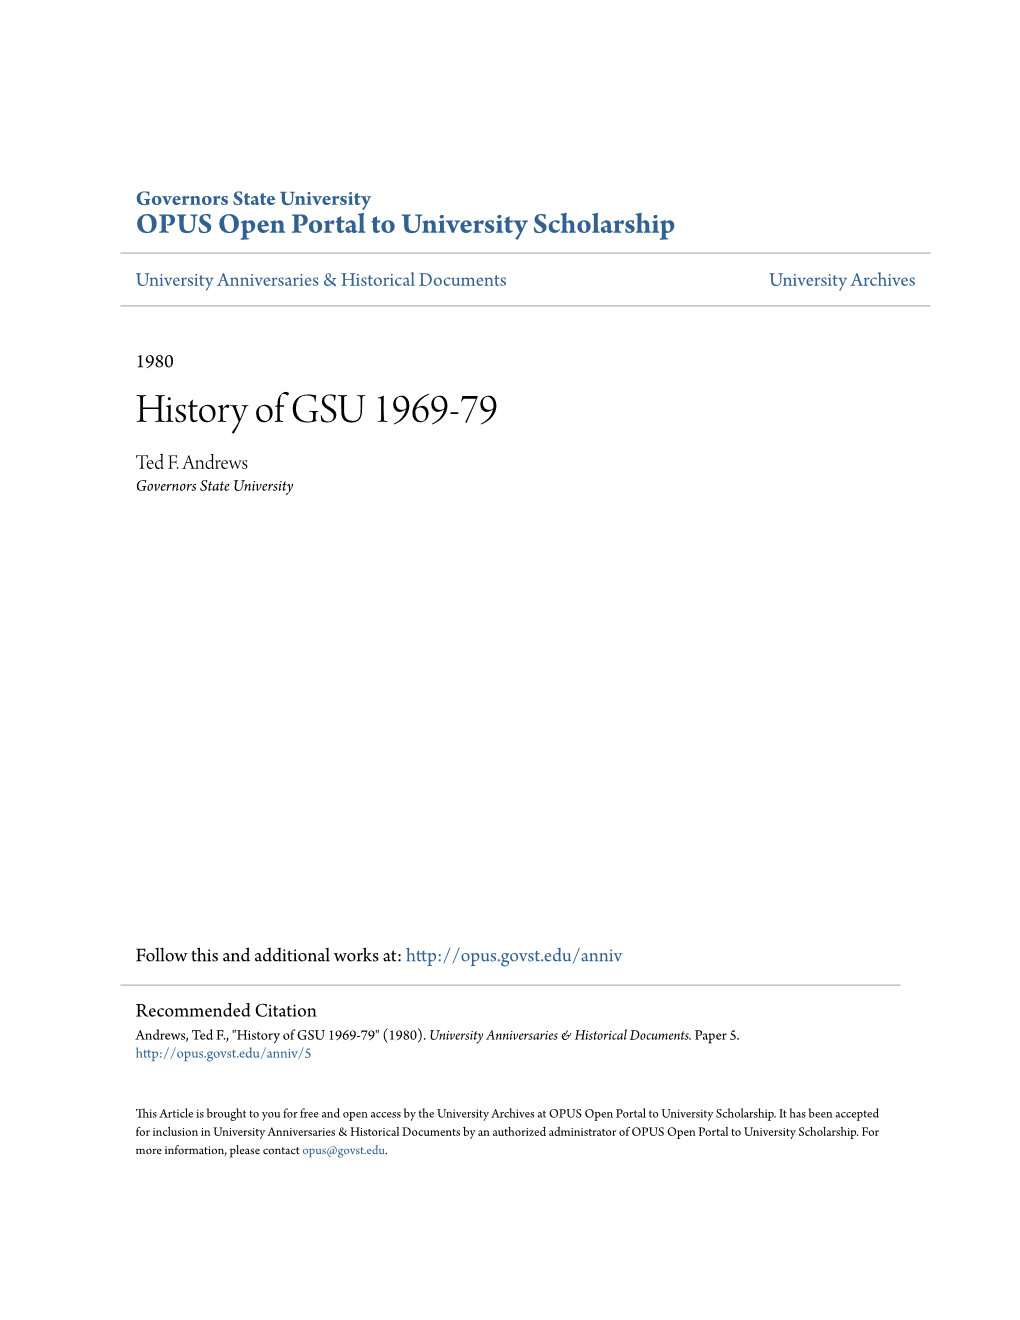 History of GSU 1969-79 Ted F